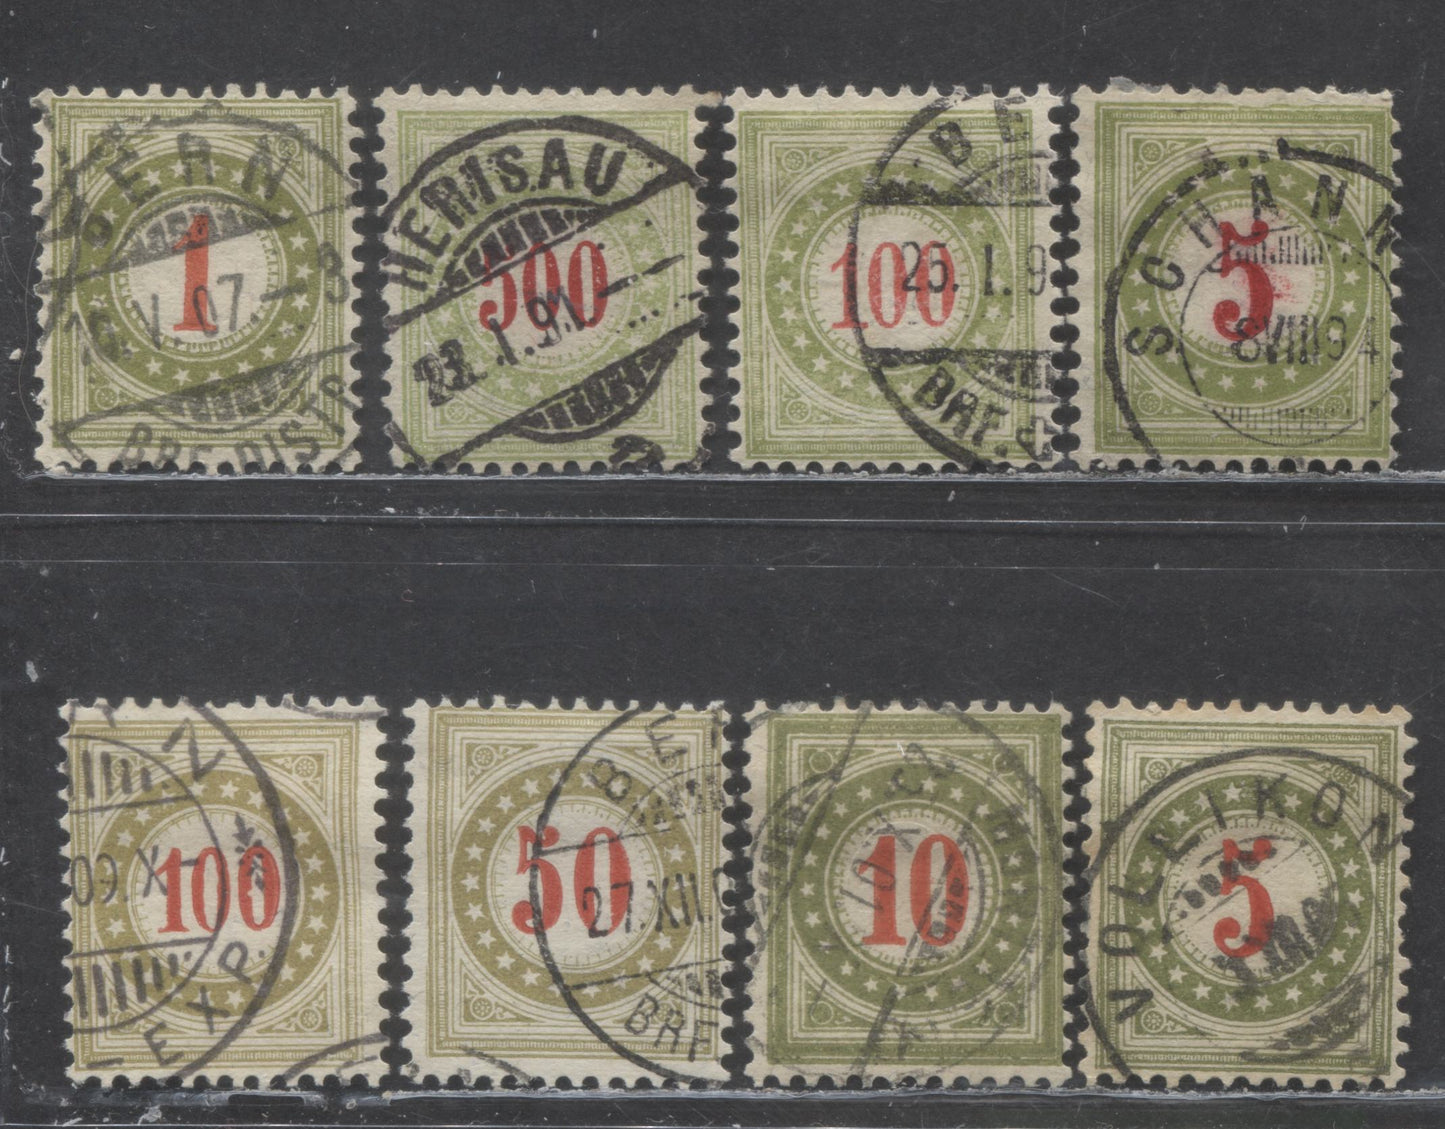 Lot 319 Switzerland SC#J21Hi/J34 1892-1916 Postage Dues, 8 Fine/Very Fine Used Singles, Click on Listing to See ALL Pictures, Estimated Value $20 USD